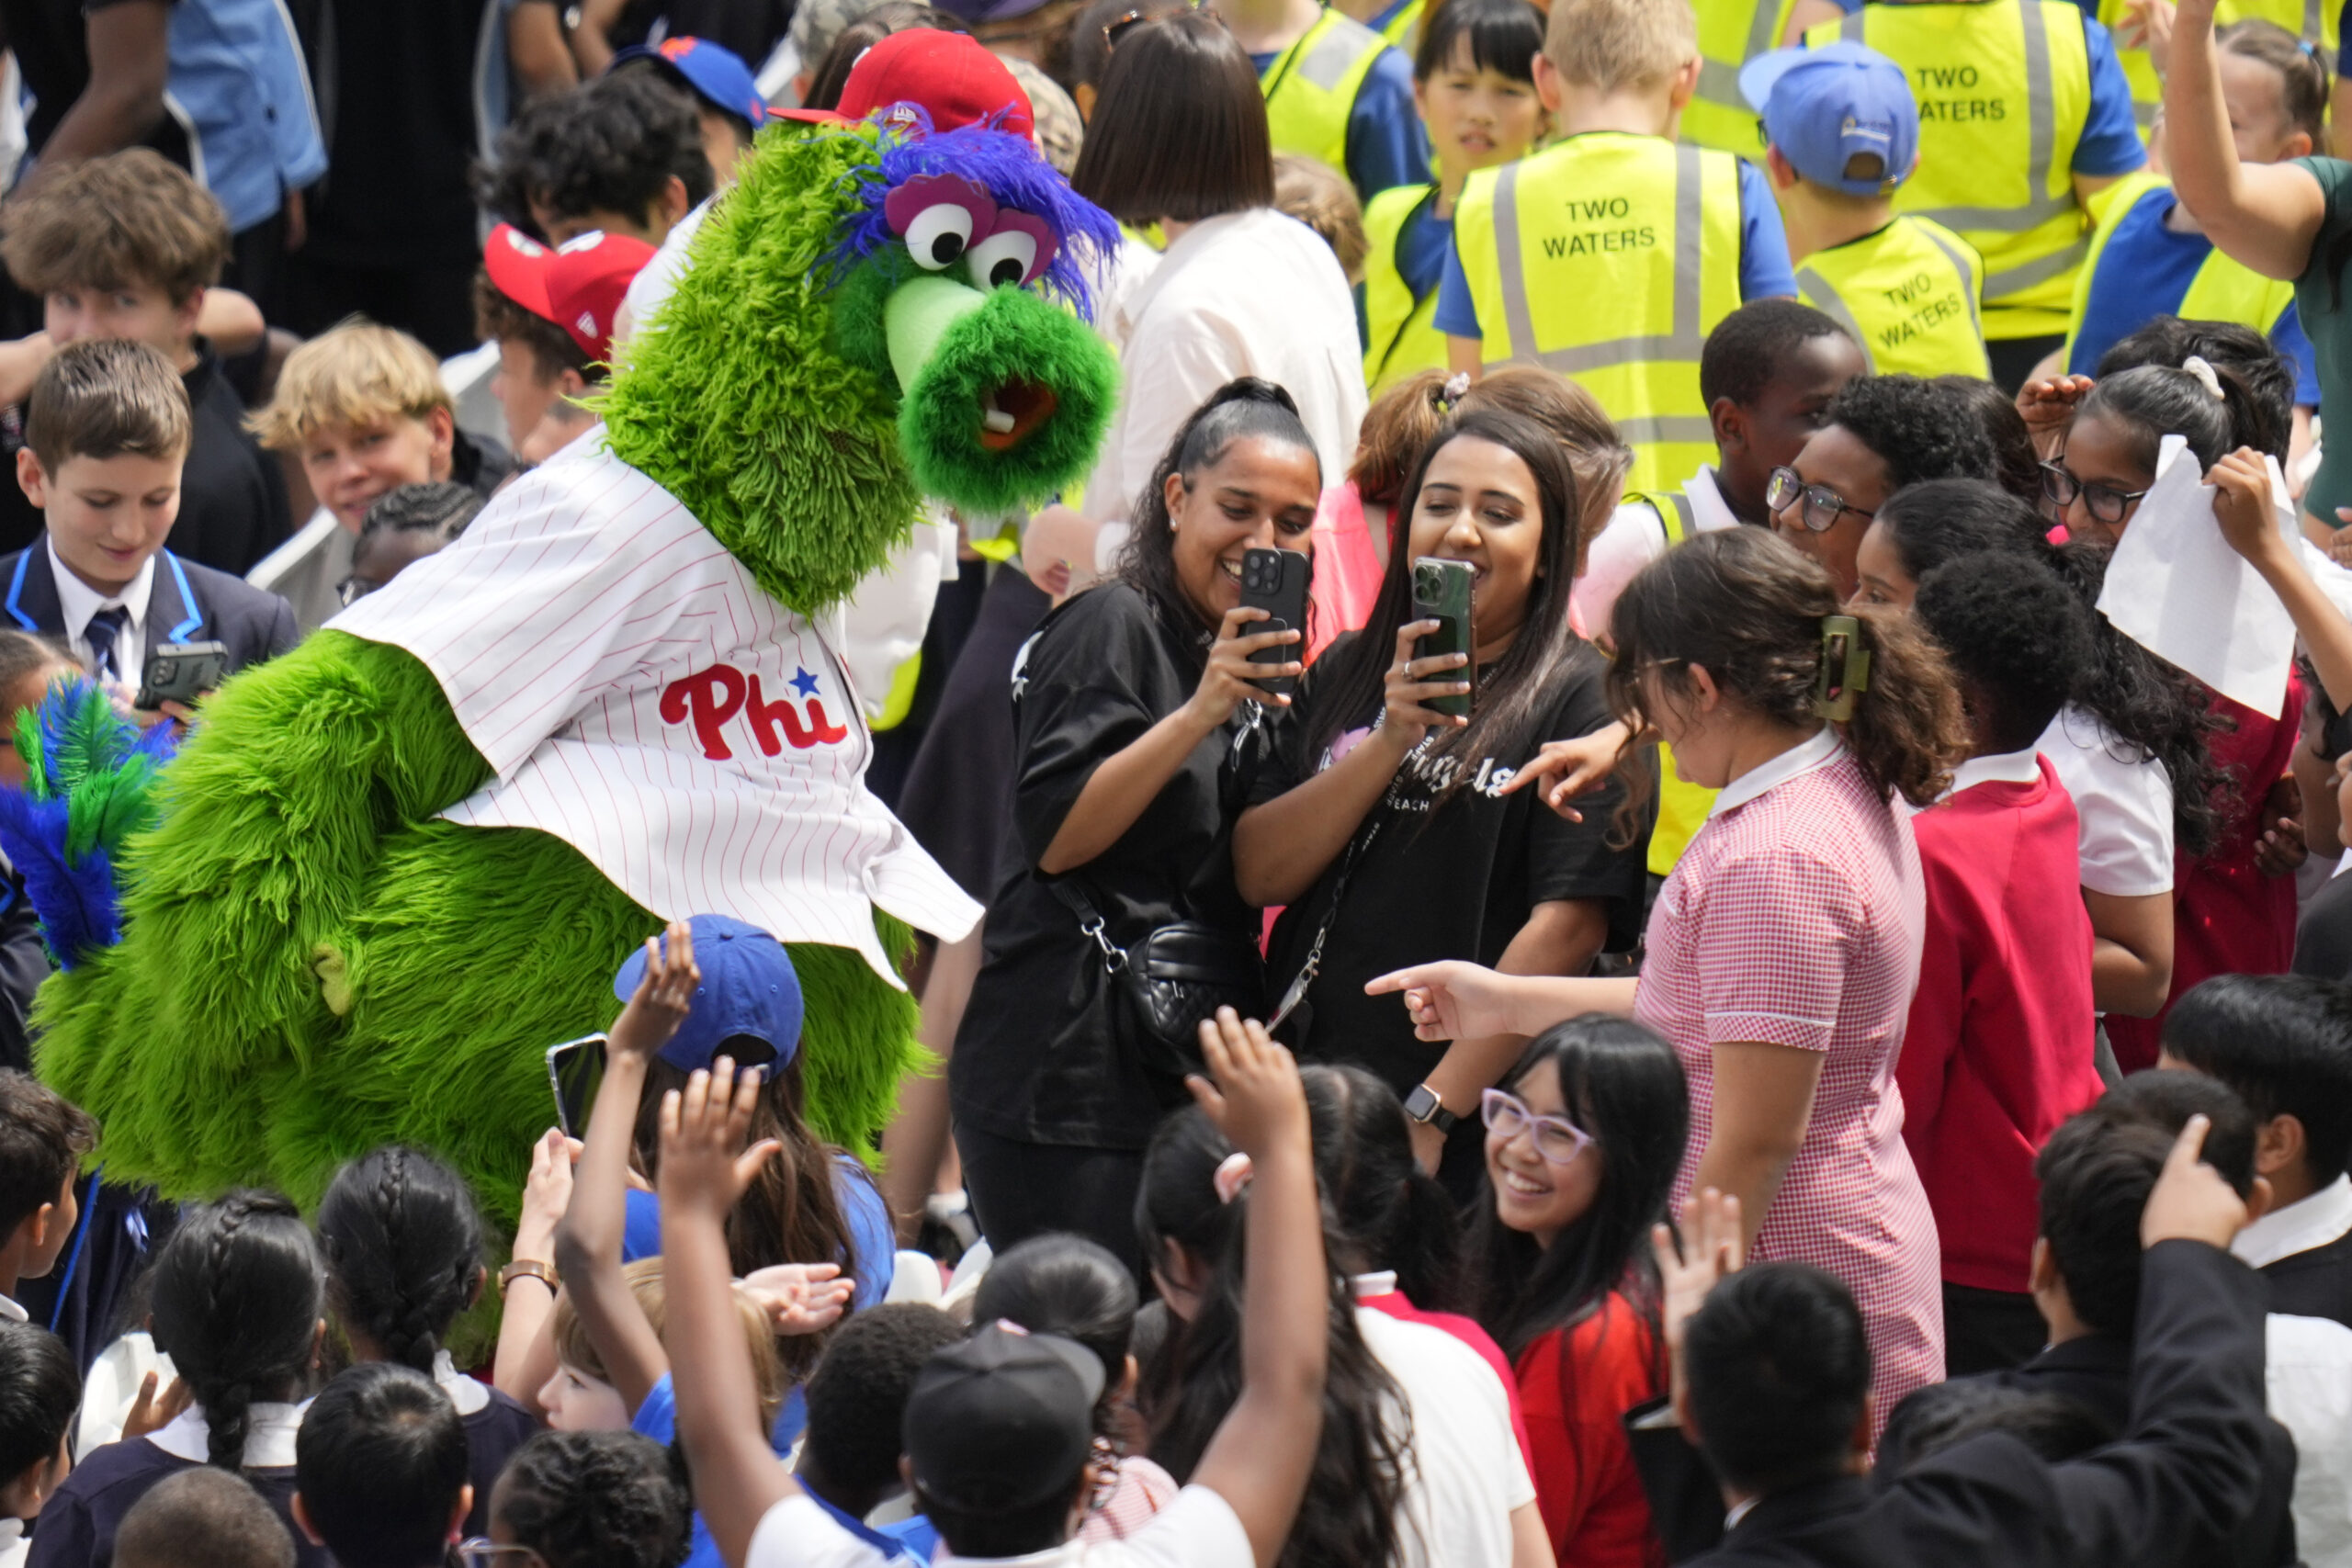 The Phillie Phanatic in the stands at a stadium with fans.